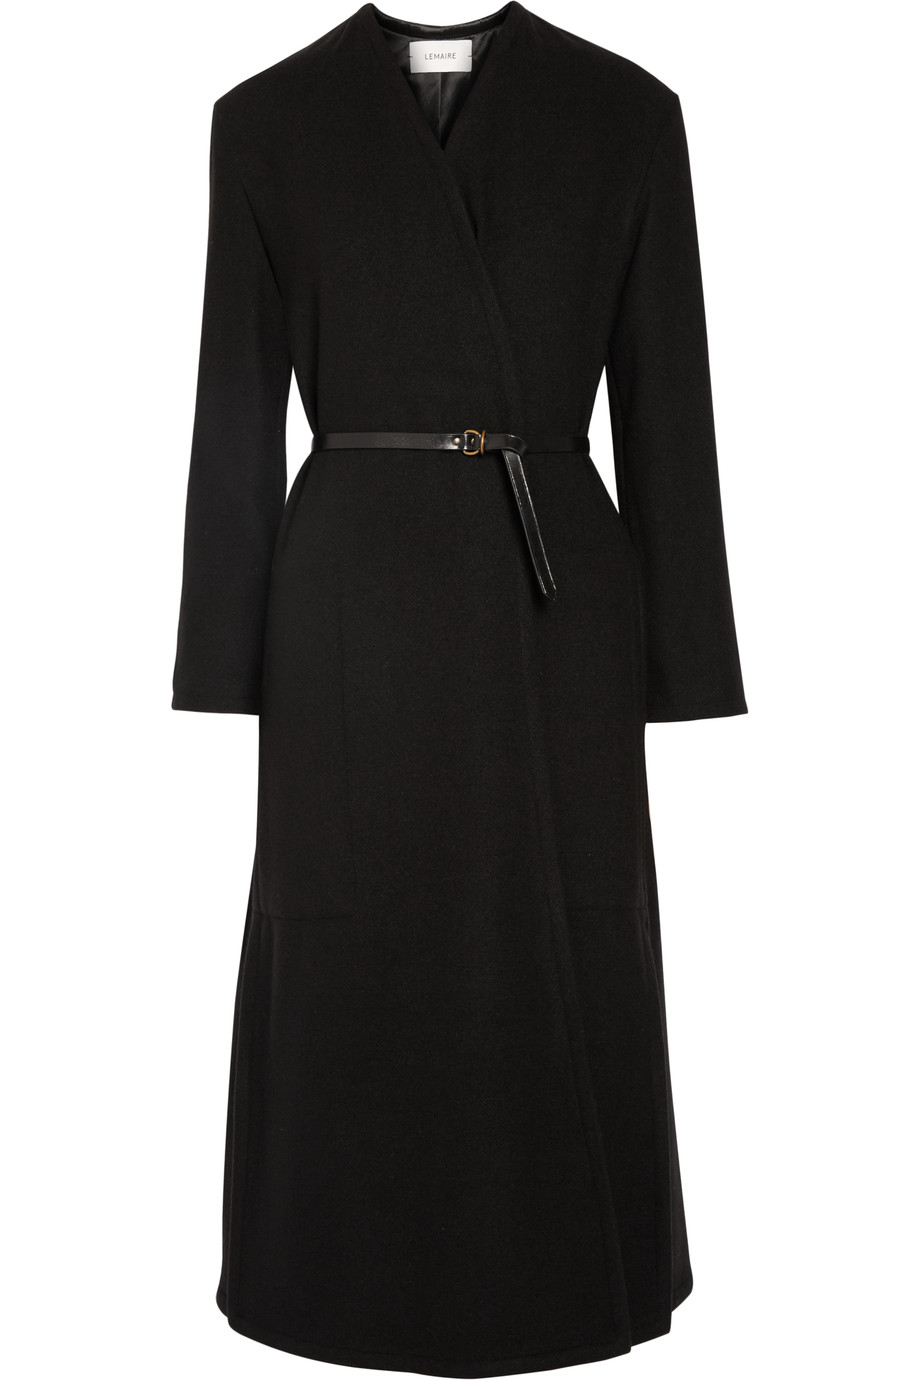 Lemaire Belted Yak Coat | ModeSens